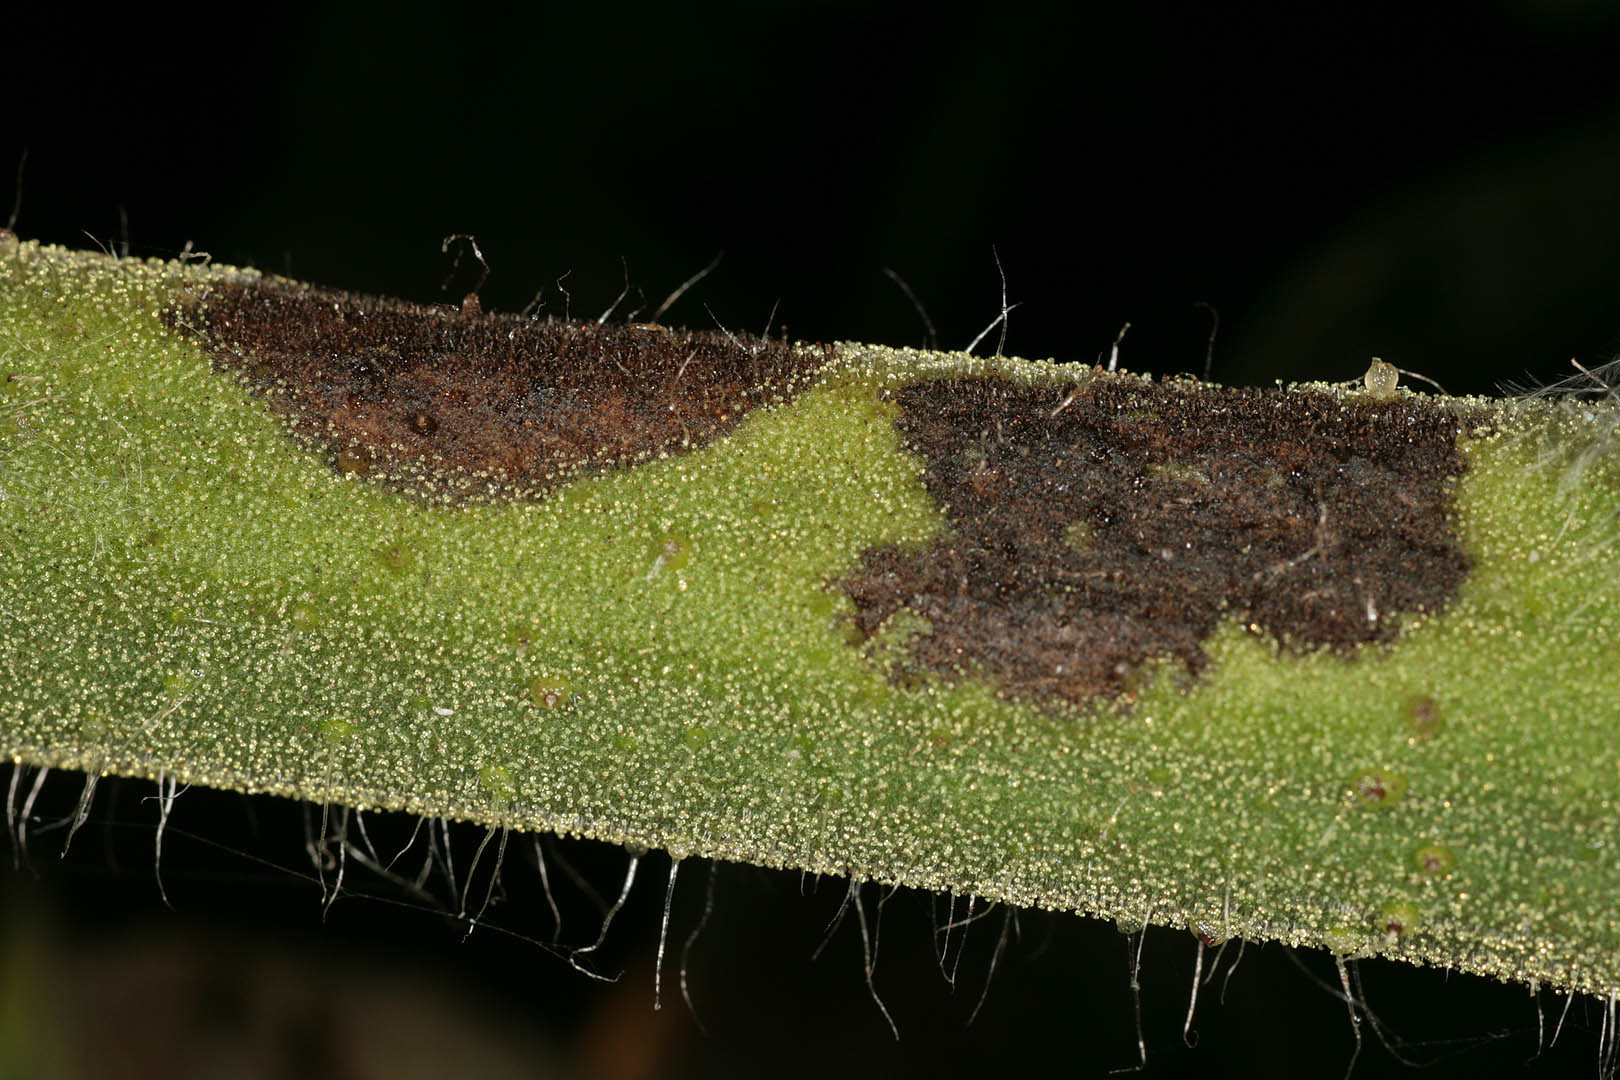 Image of Phytophthora infestans